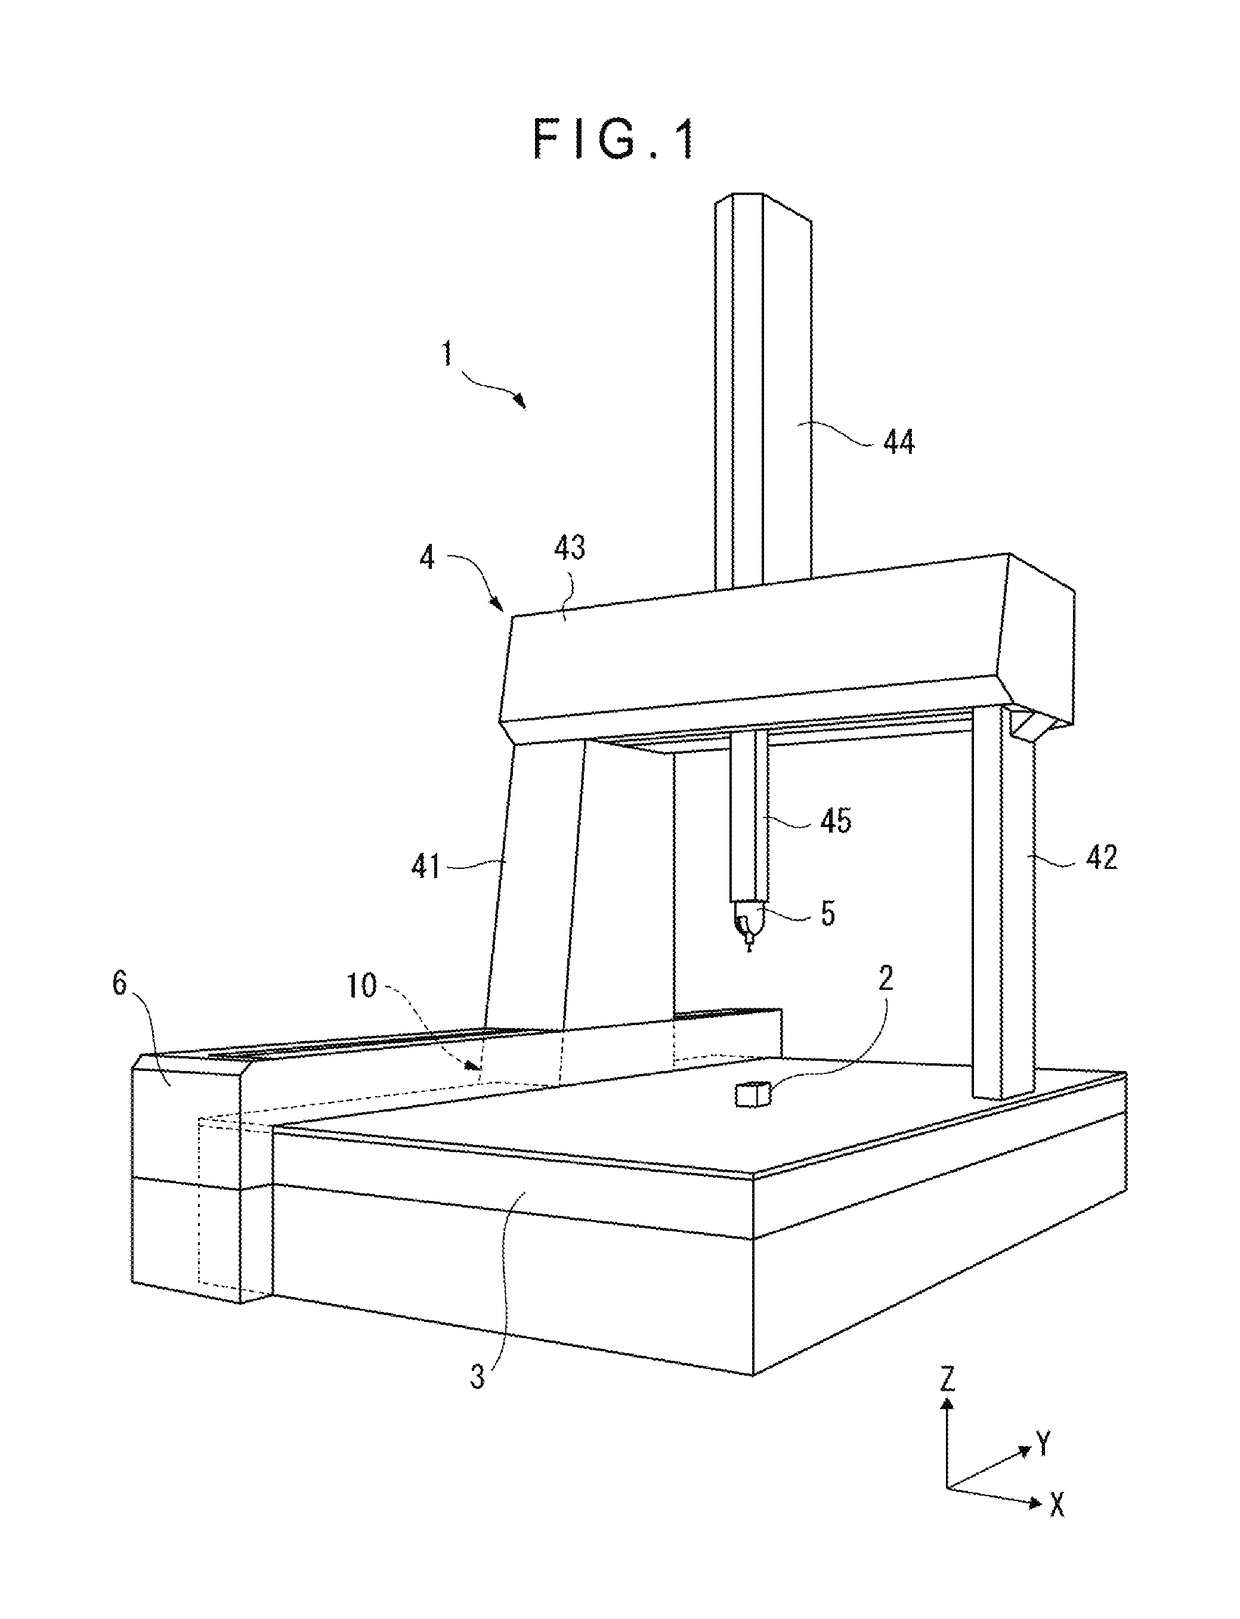 Profile measuring machine and movement mechanism